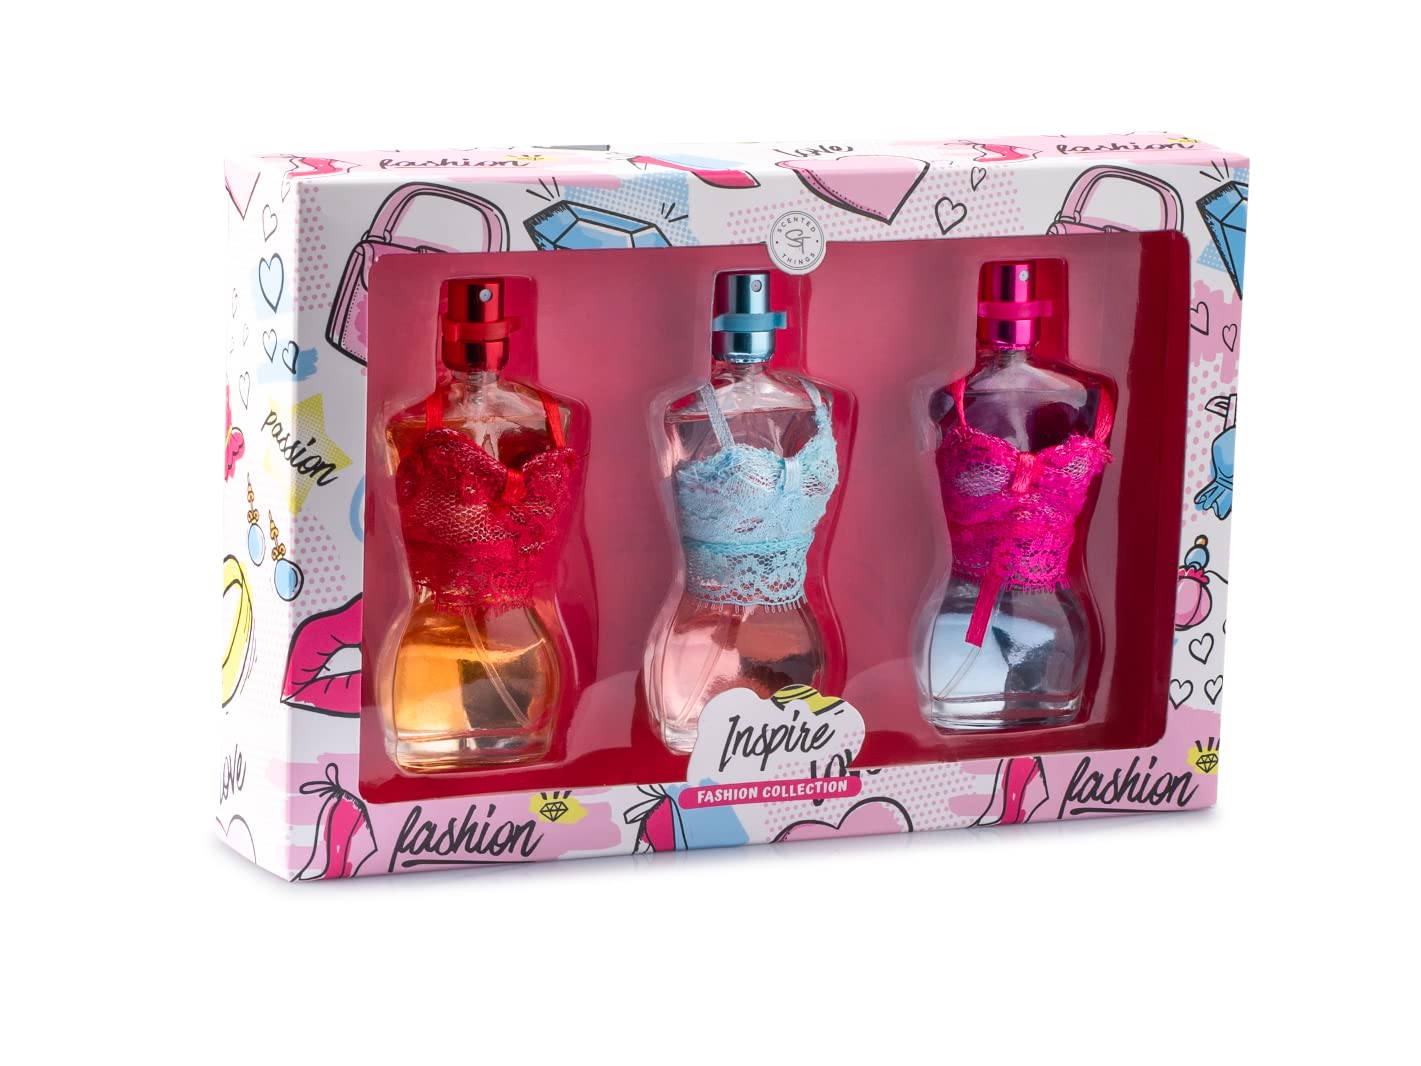 SCENTED THINGS Inspire Body Spray Girl Perfume Set | Little Girls to Teen Girl Gifts, Girl Birthday Gift, Body Mist Perfume Set in Mannequin Figure Shaped Bottles | Fashion Collection (3 Piece Set)